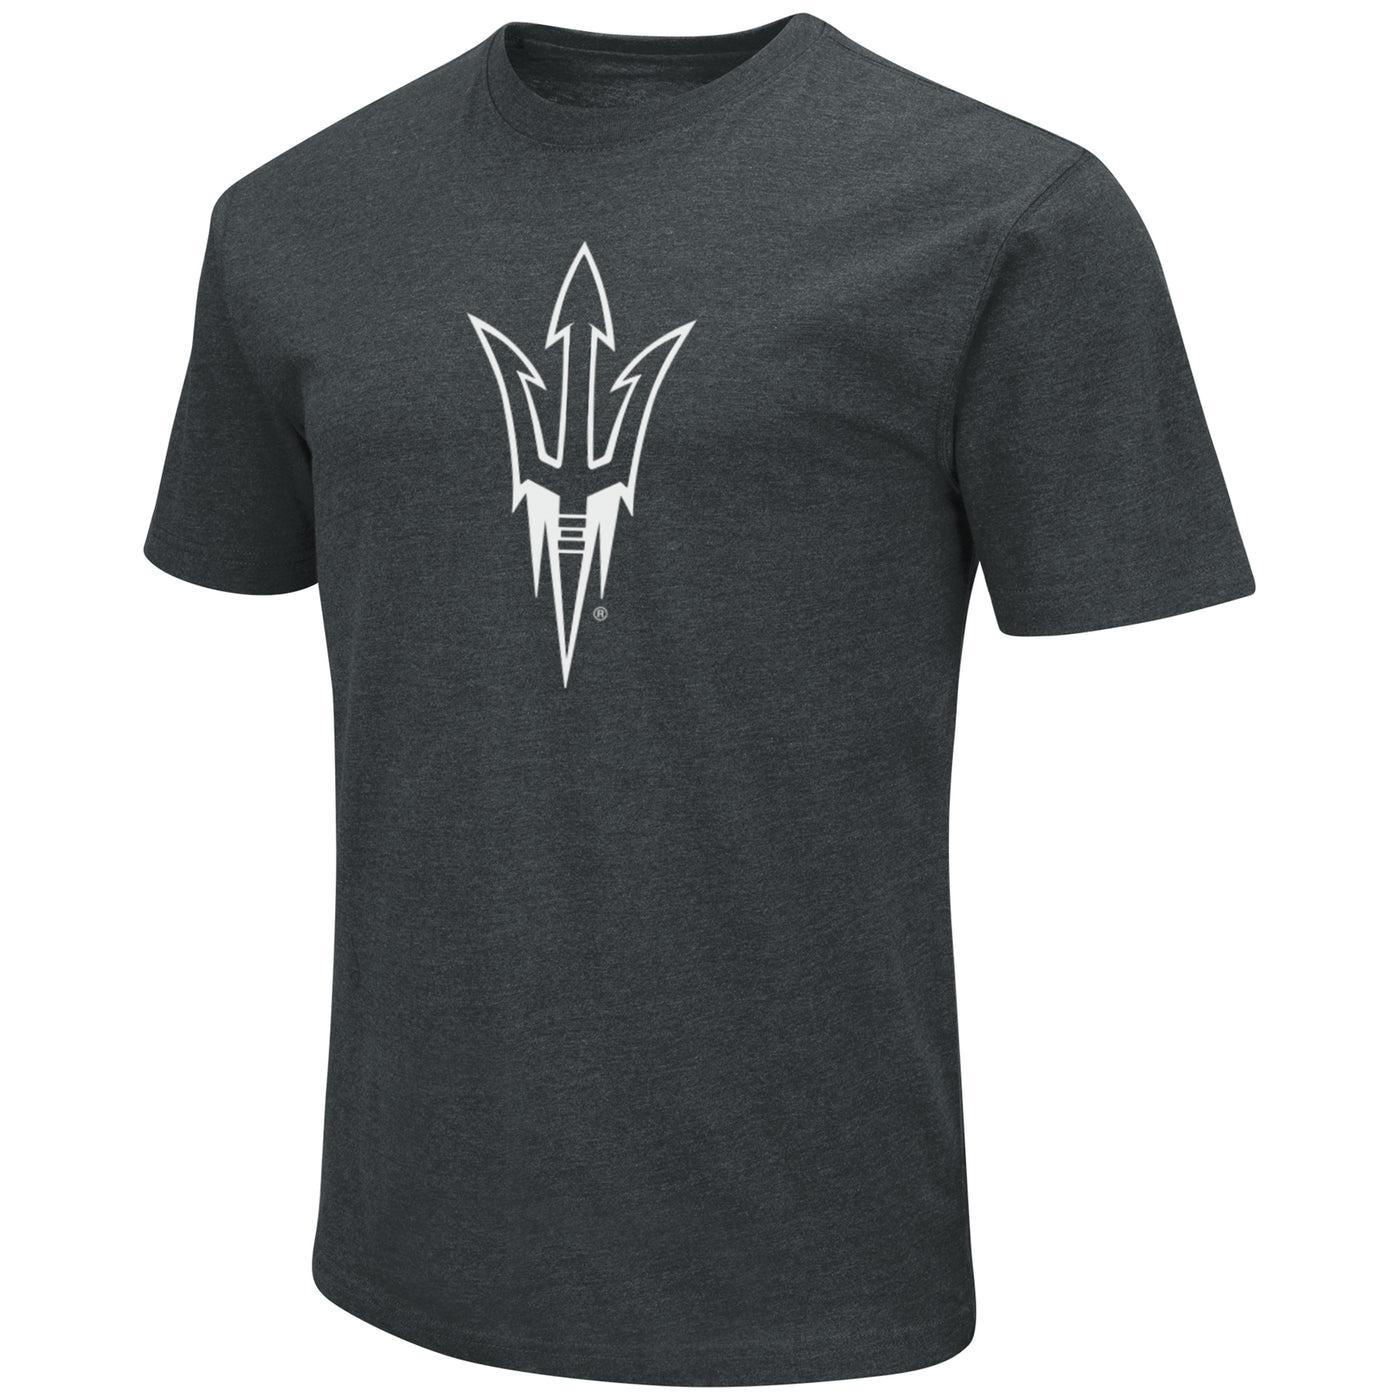 Black ASU tee with a white pitchfork outline on the chest. 